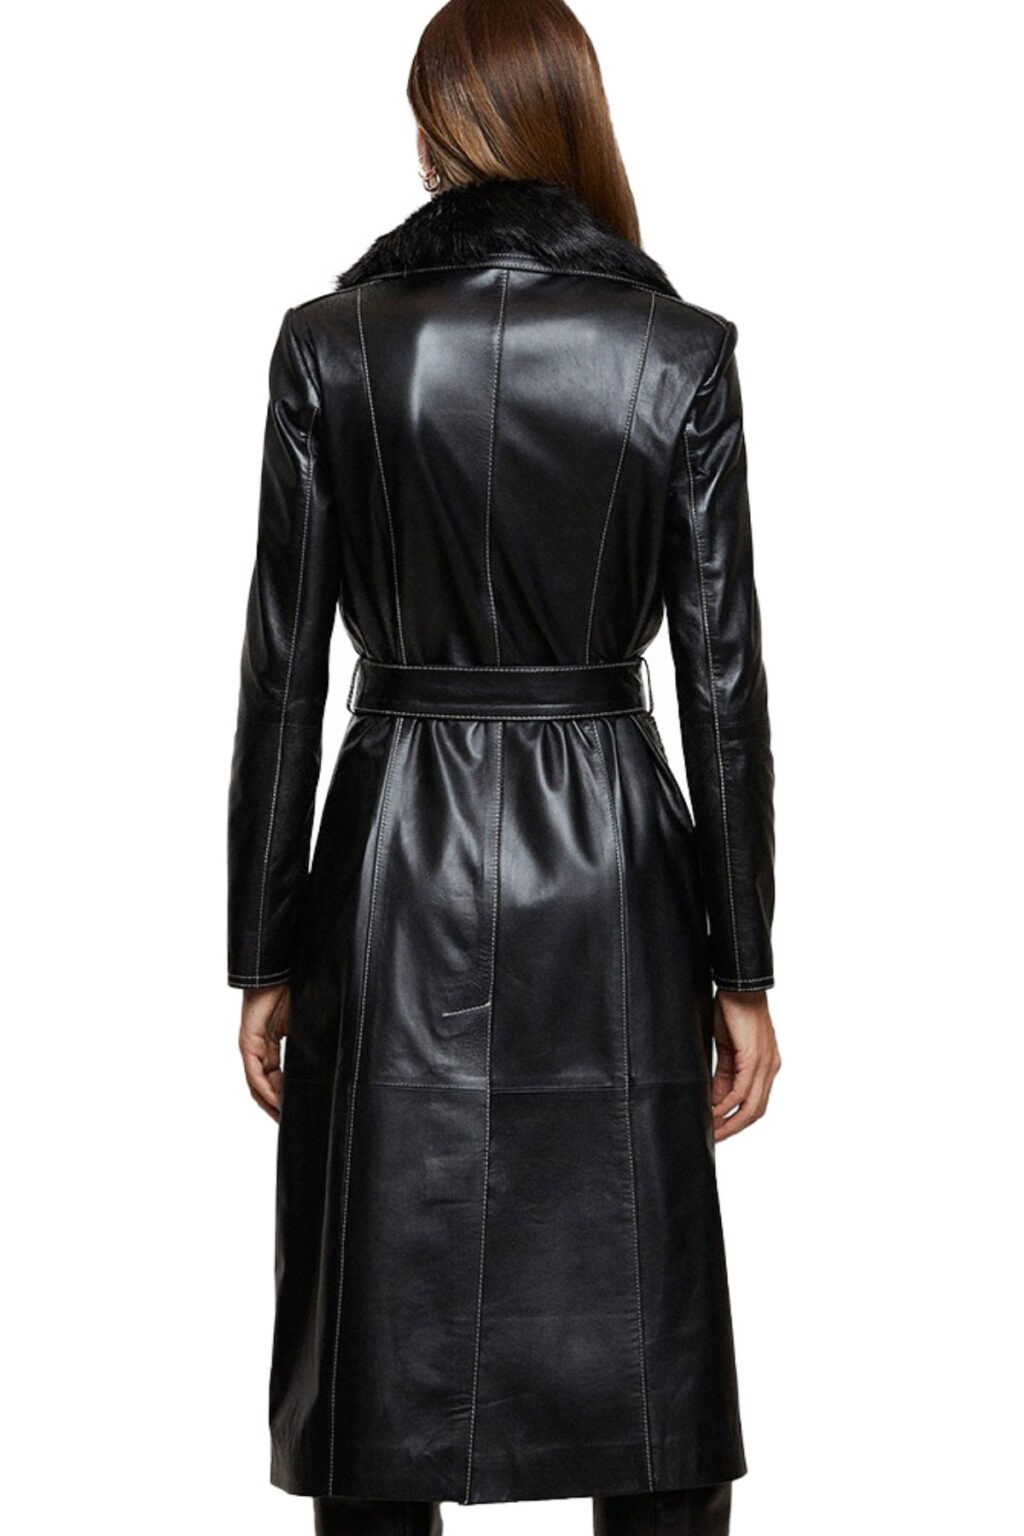 Real Women Trench Coat for Sale- Ladies Black Leather Jacket